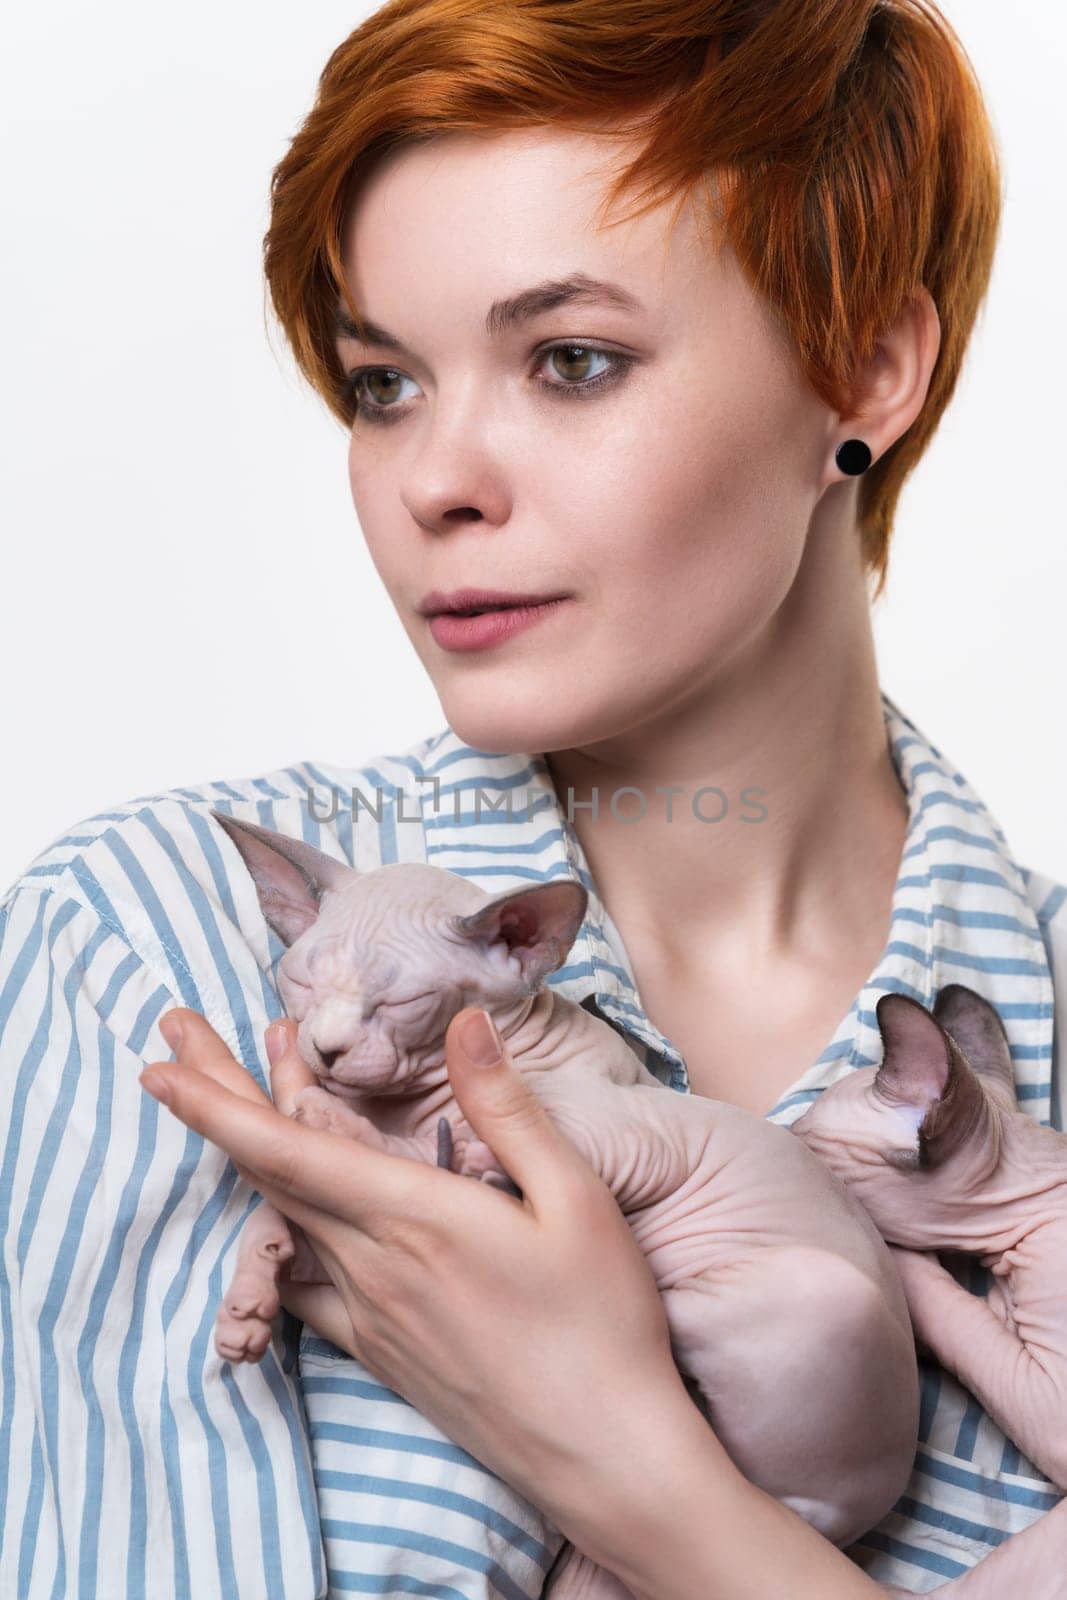 Beautiful redhead young woman hugging Sphynx Cat and looking away. Studio shot on white background. Portrait of hipster with short hair dressed in striped white-blue casual shirt. Part of series.